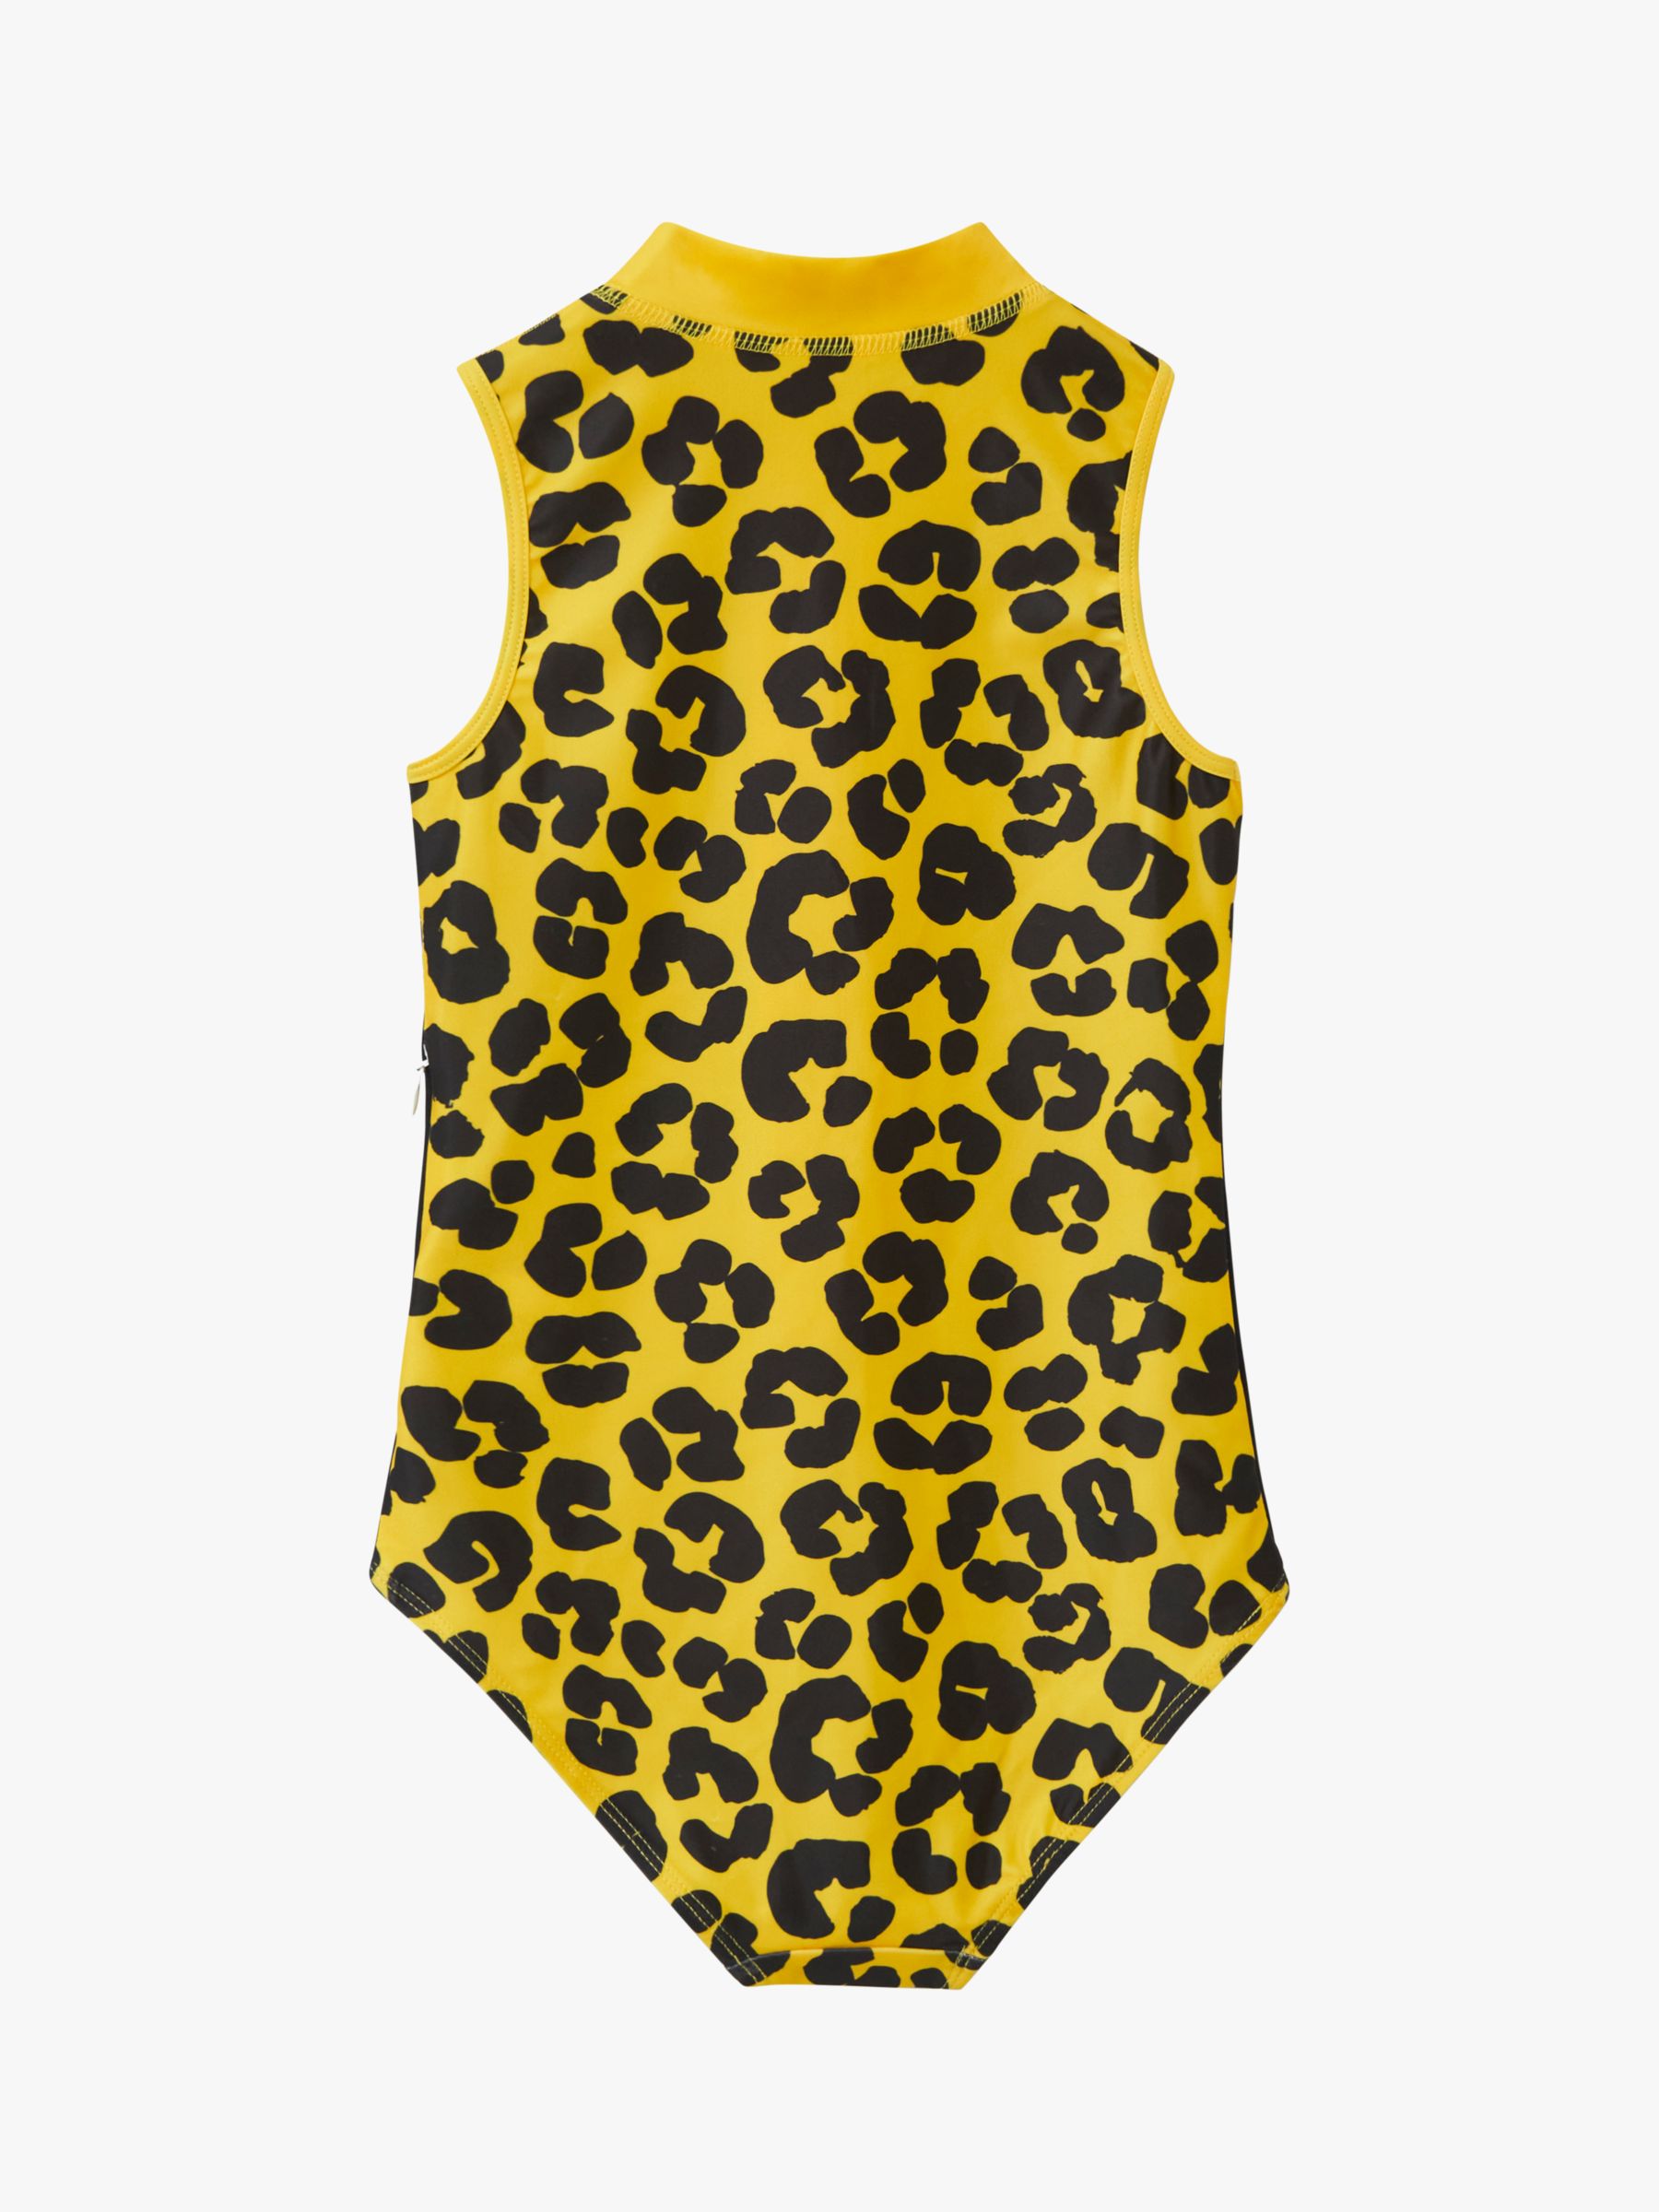 Roarsome Kids' Dash Leopard Print Swimsuit, Mid Yellow, 2-3 years